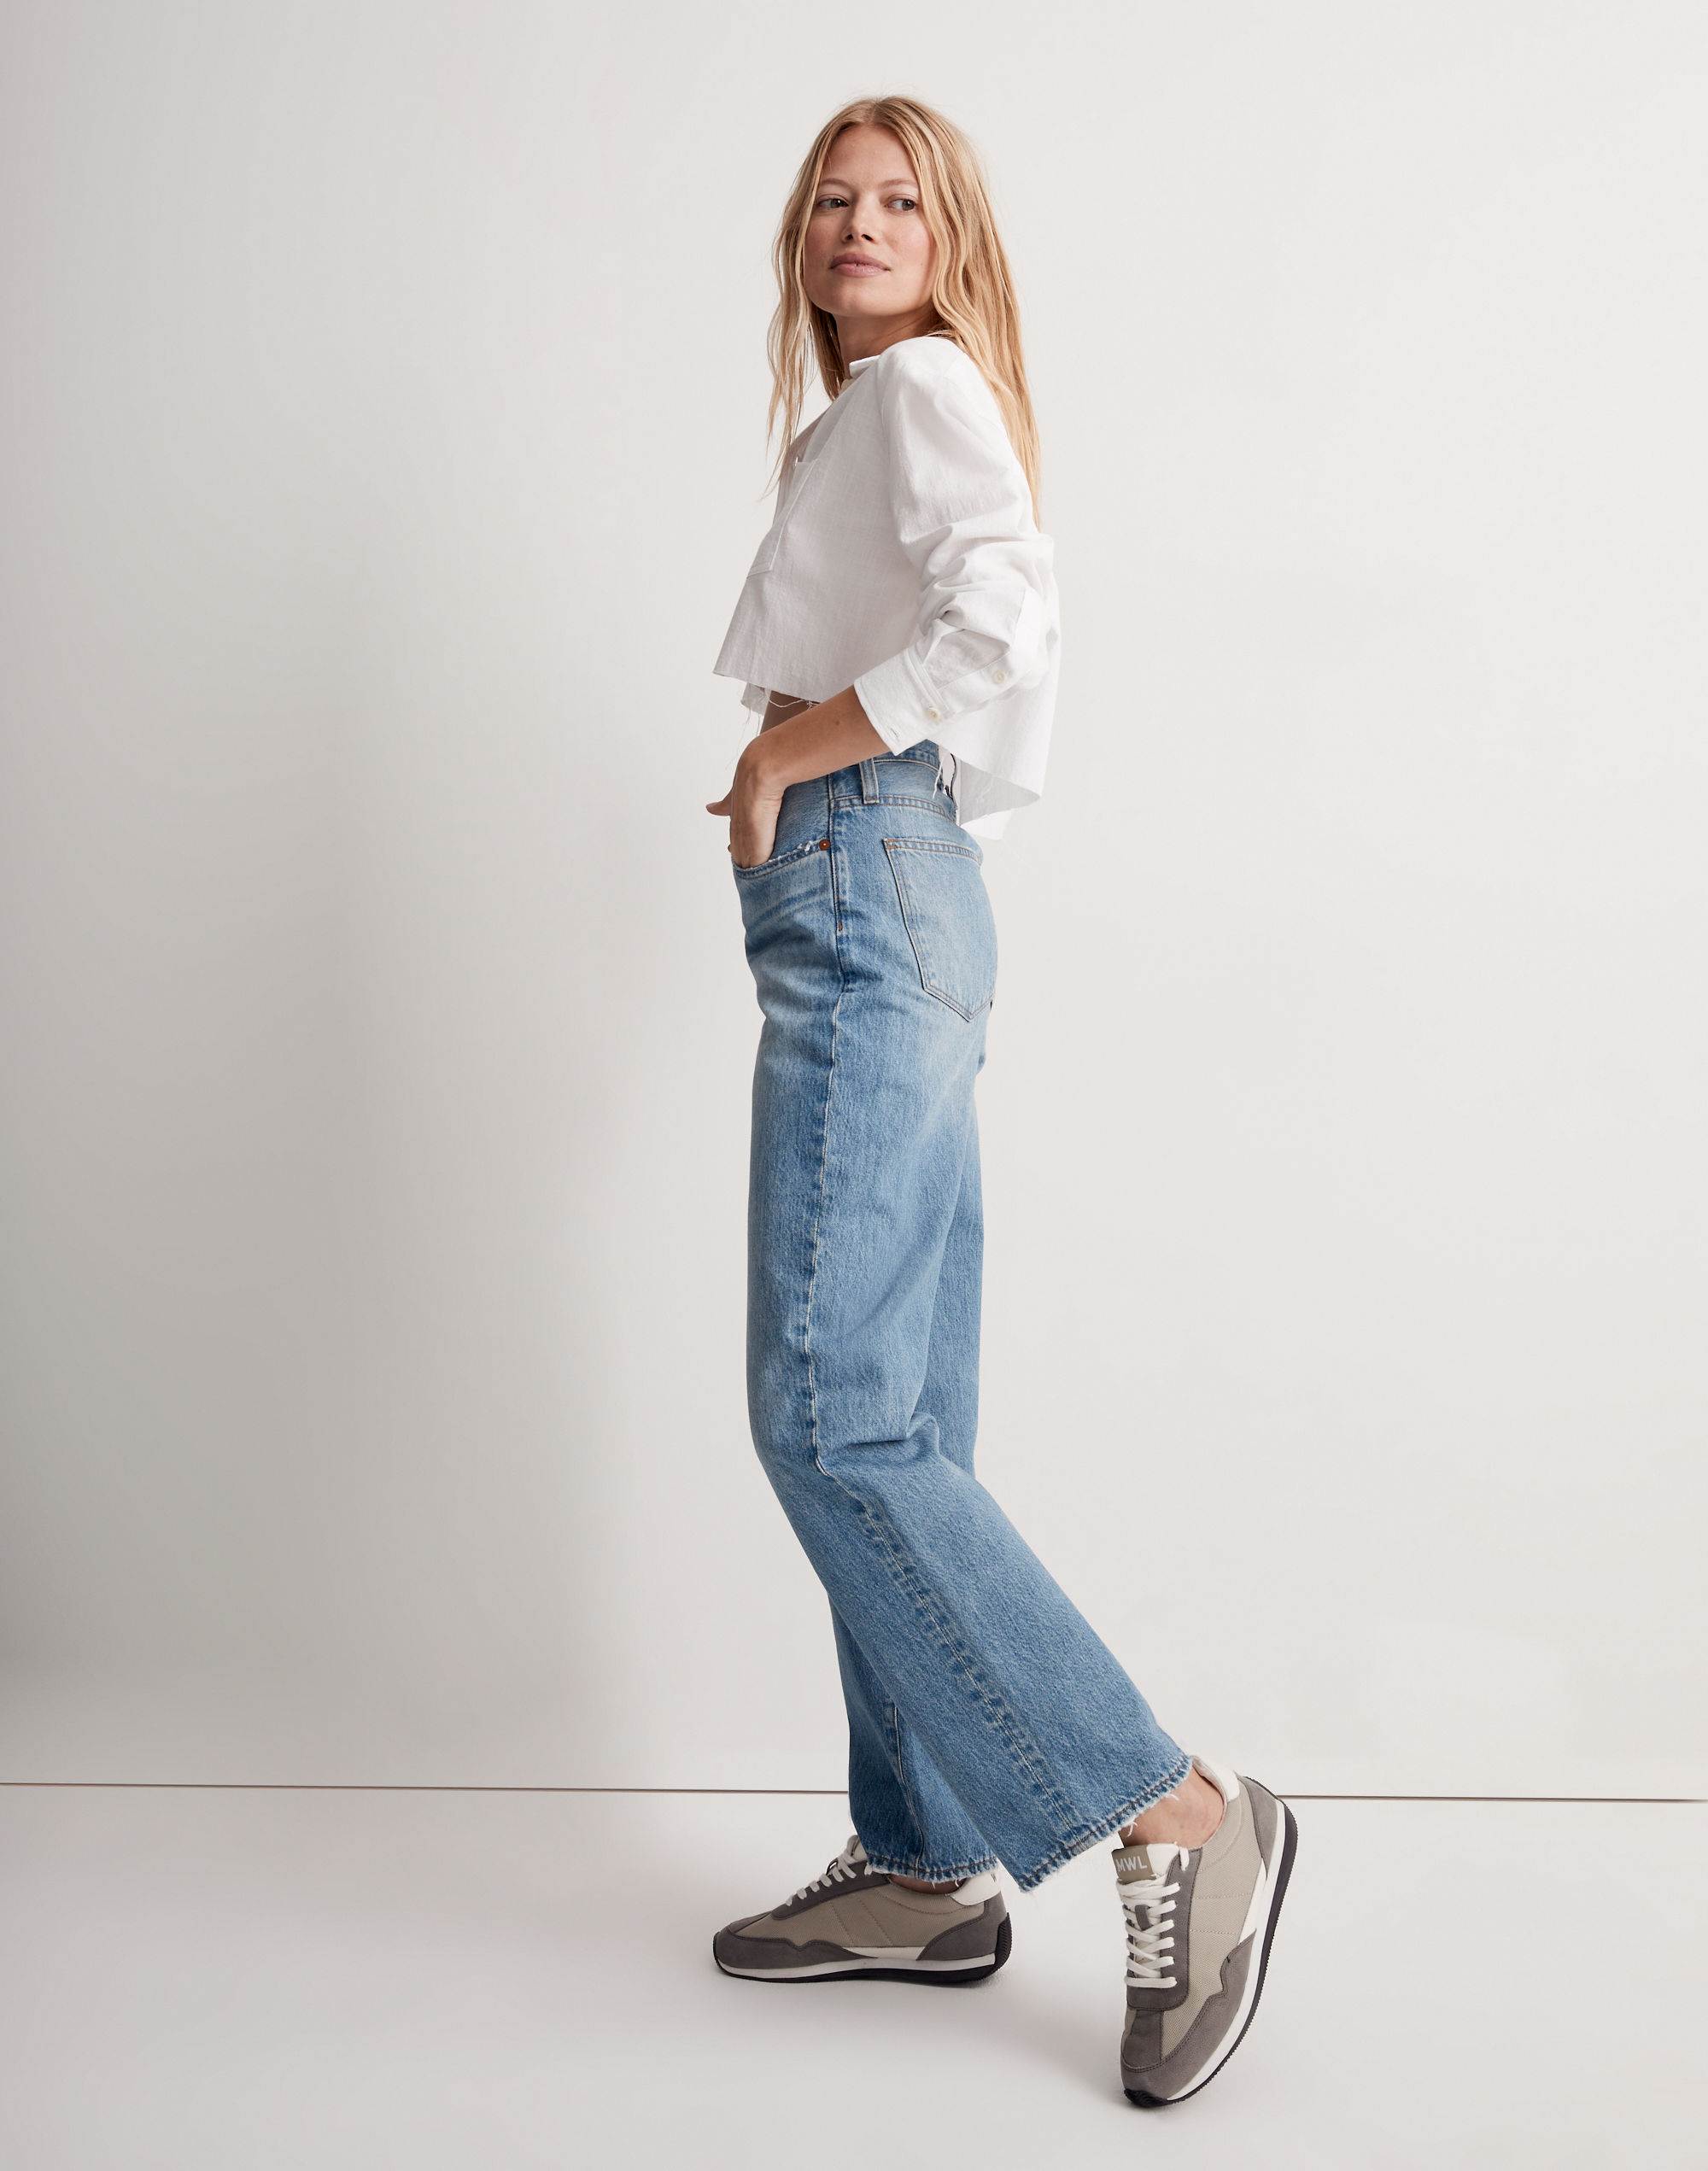 Madewell x Donni Low-Rise Loose Jeans Mathison Wash